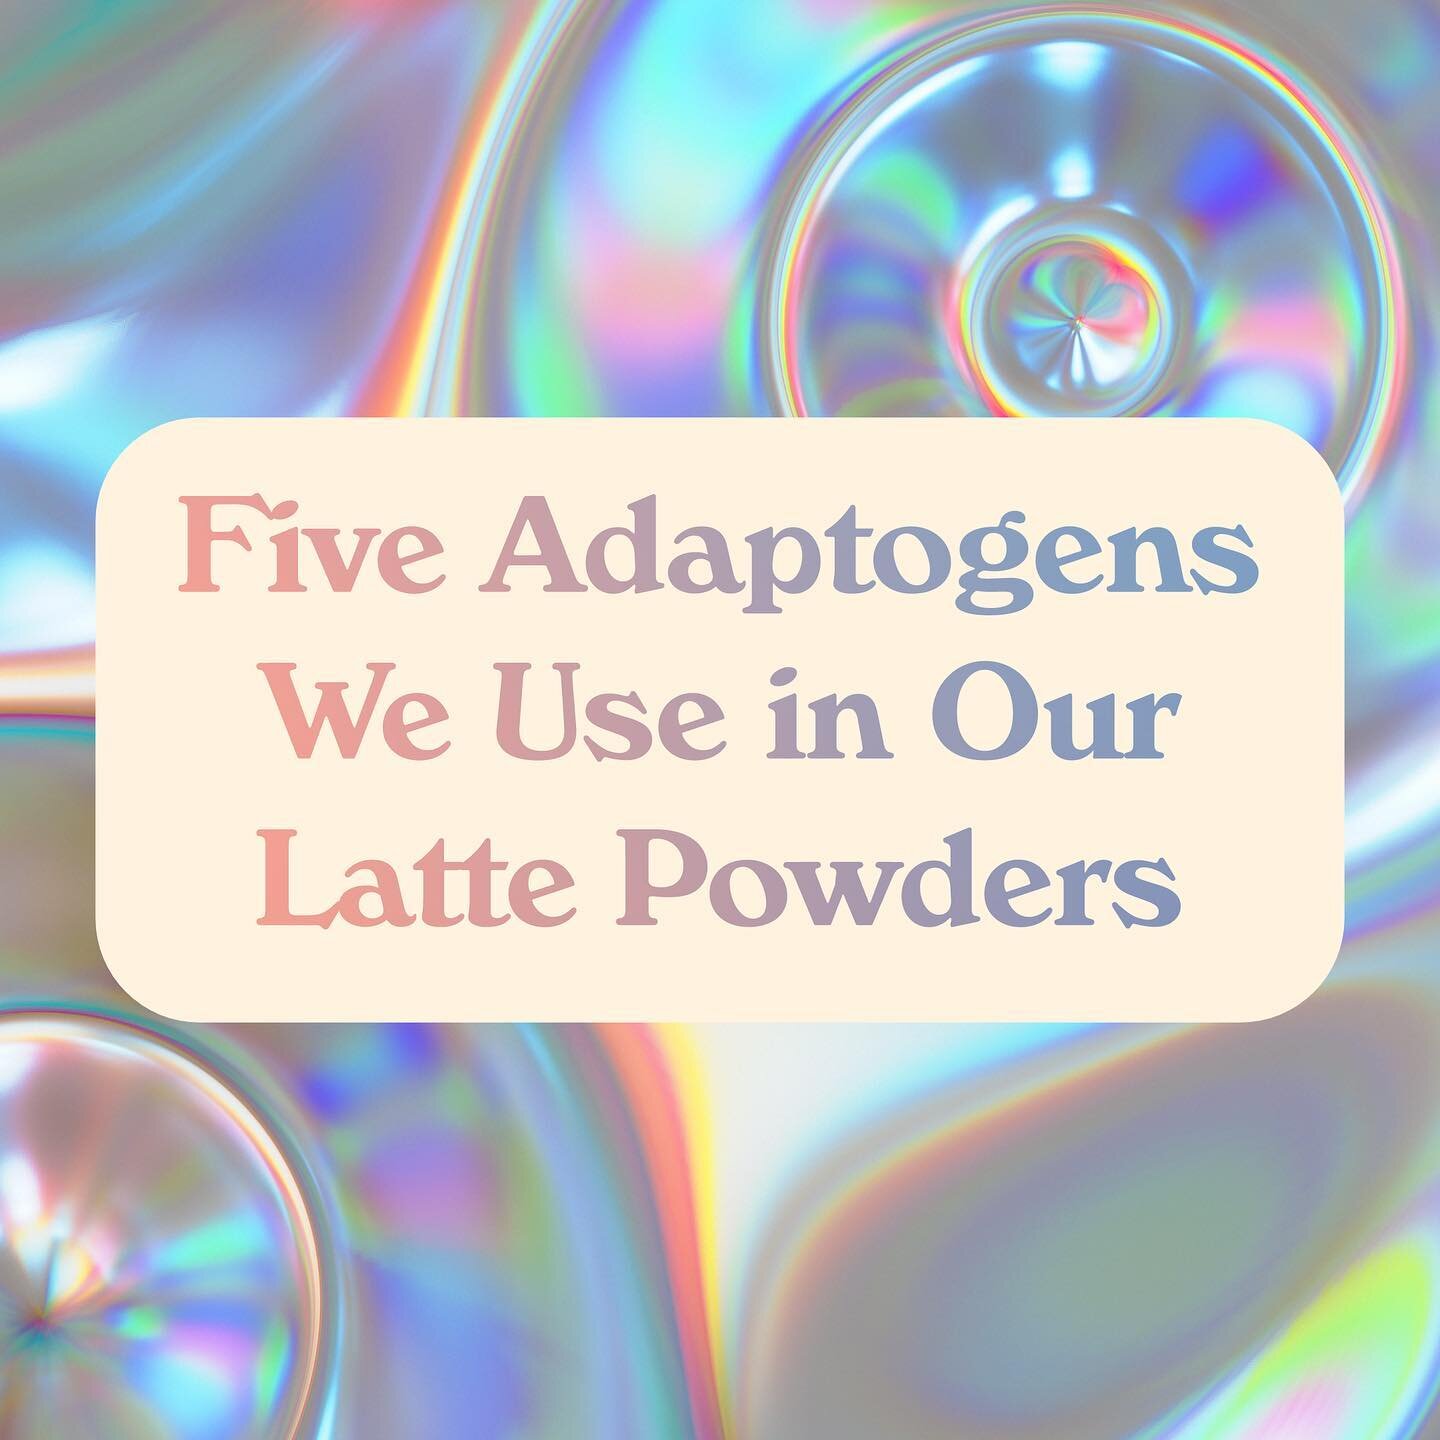 Curious which adaptogens we use in our products? Swipe to learn about a few of our faves 🍄